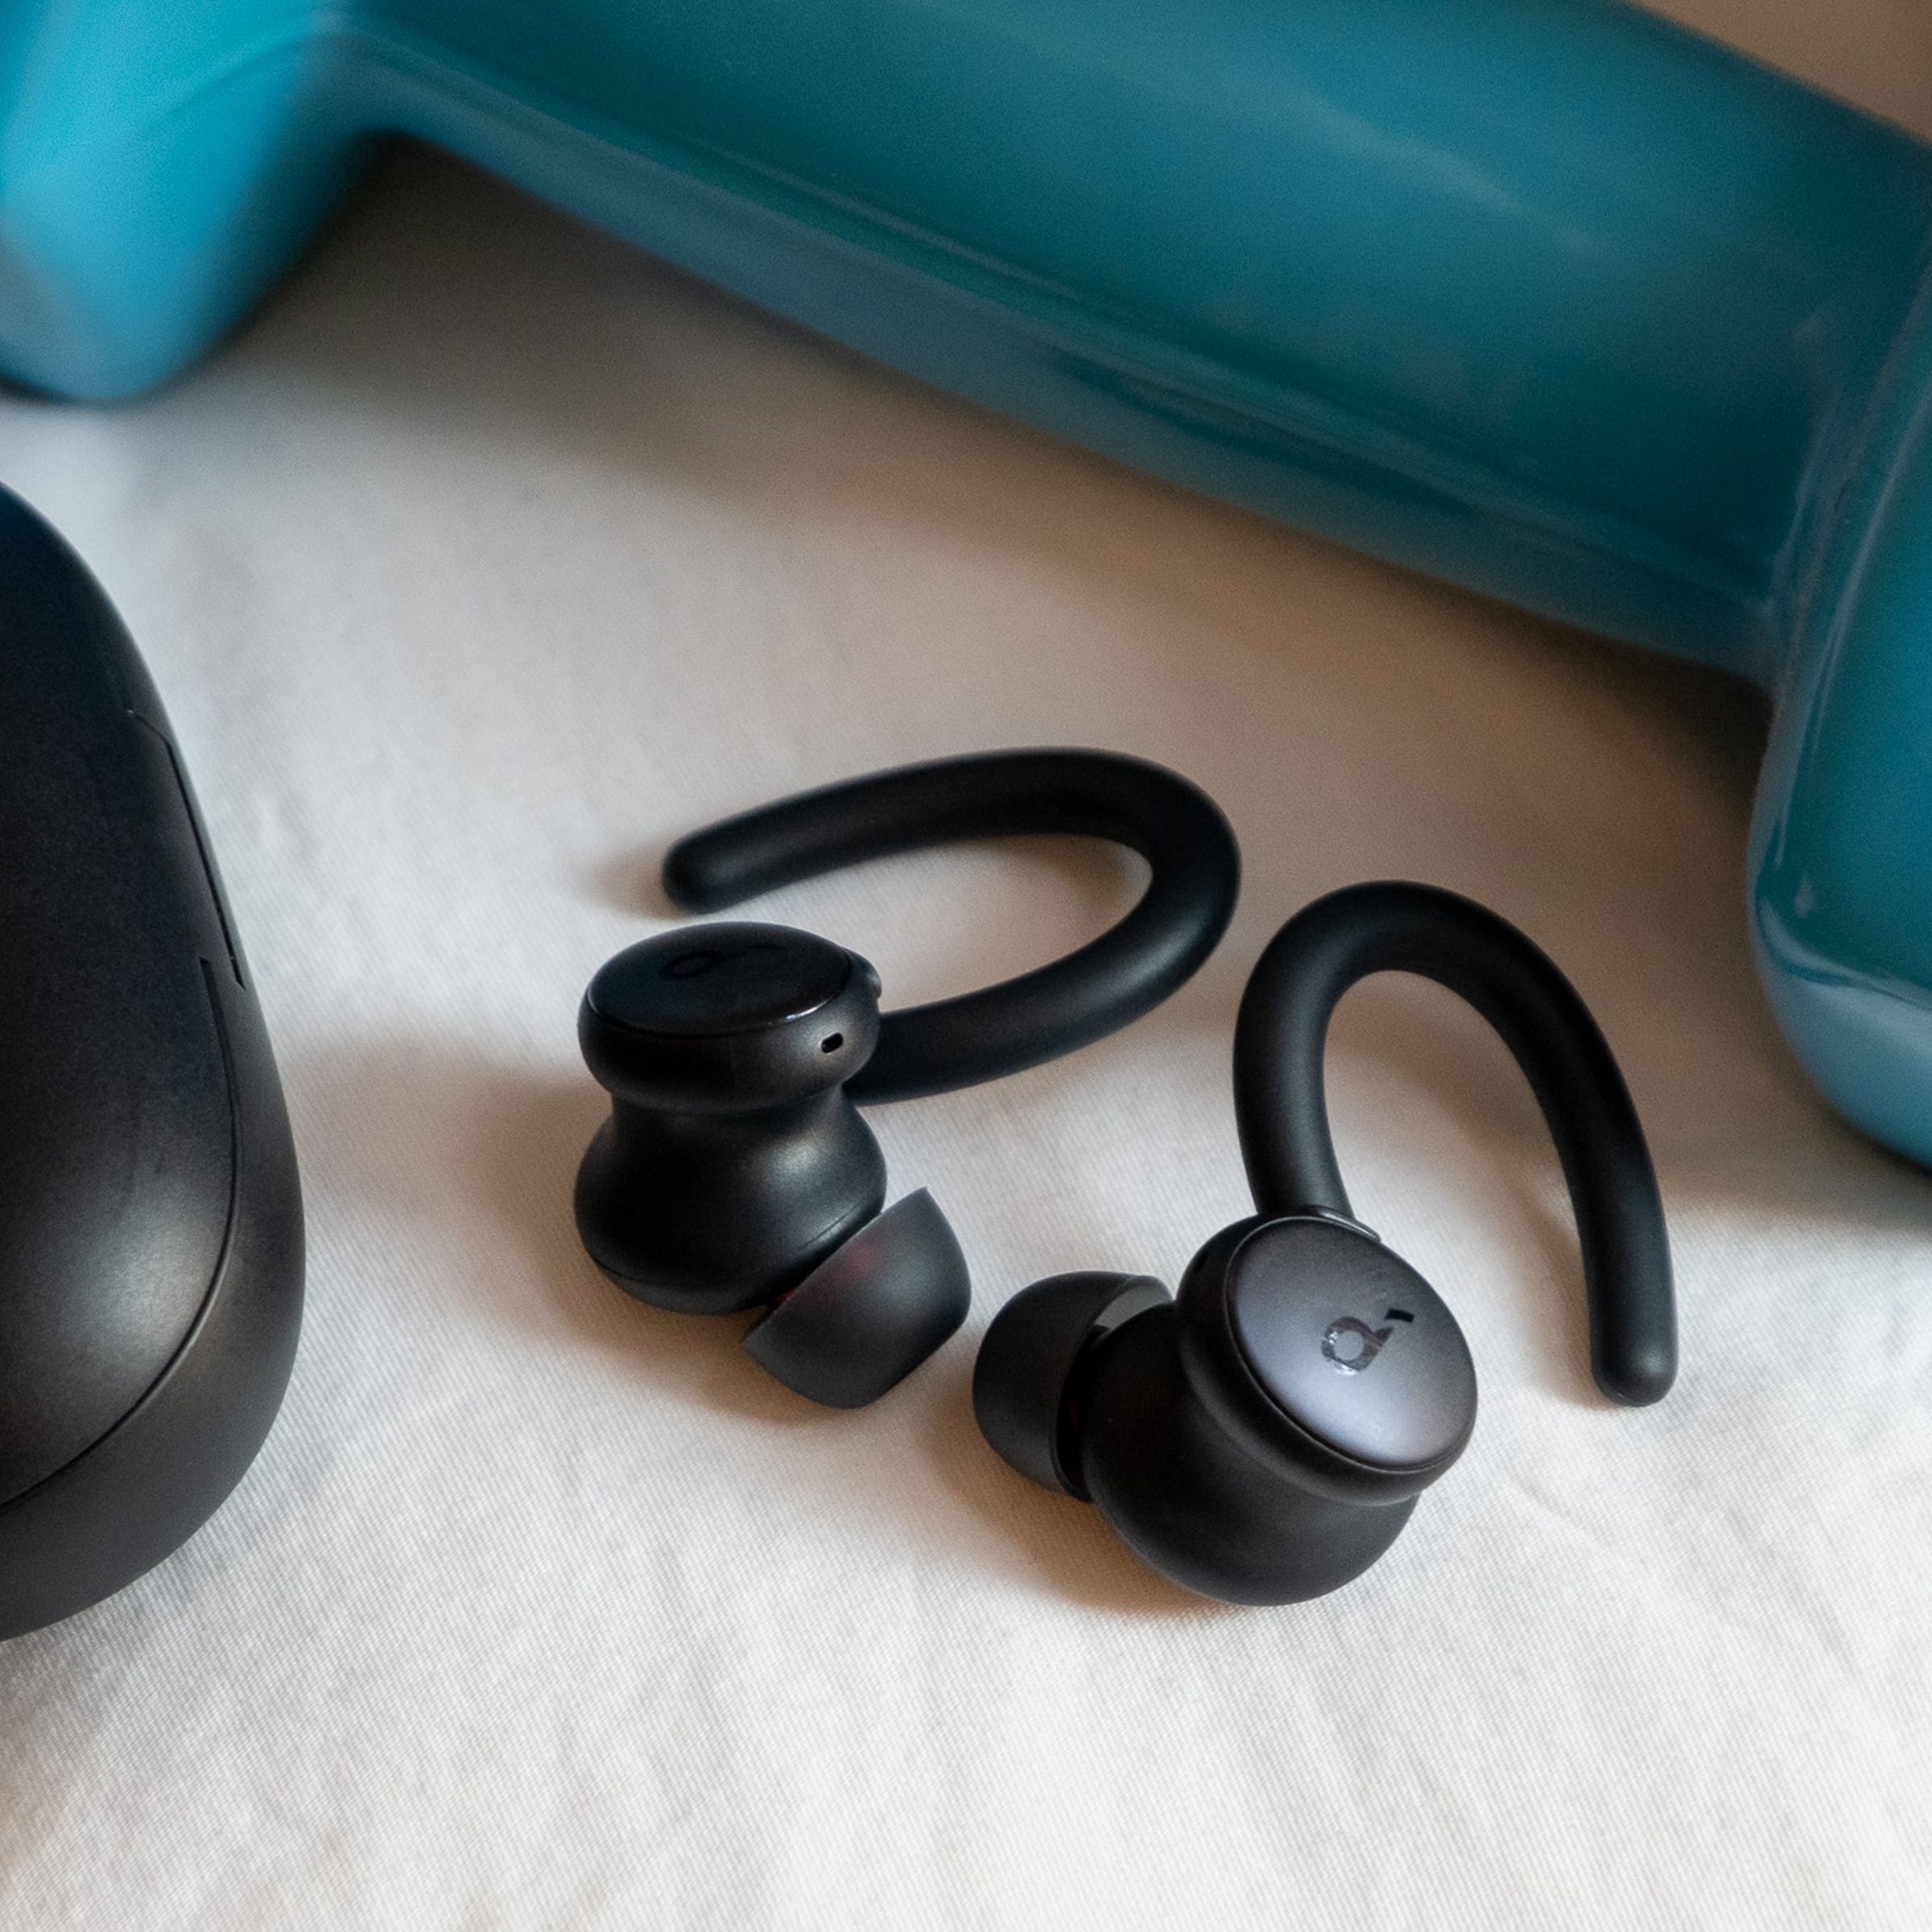 An image of Soundcore’s Sport X10 earbuds next to a weight.